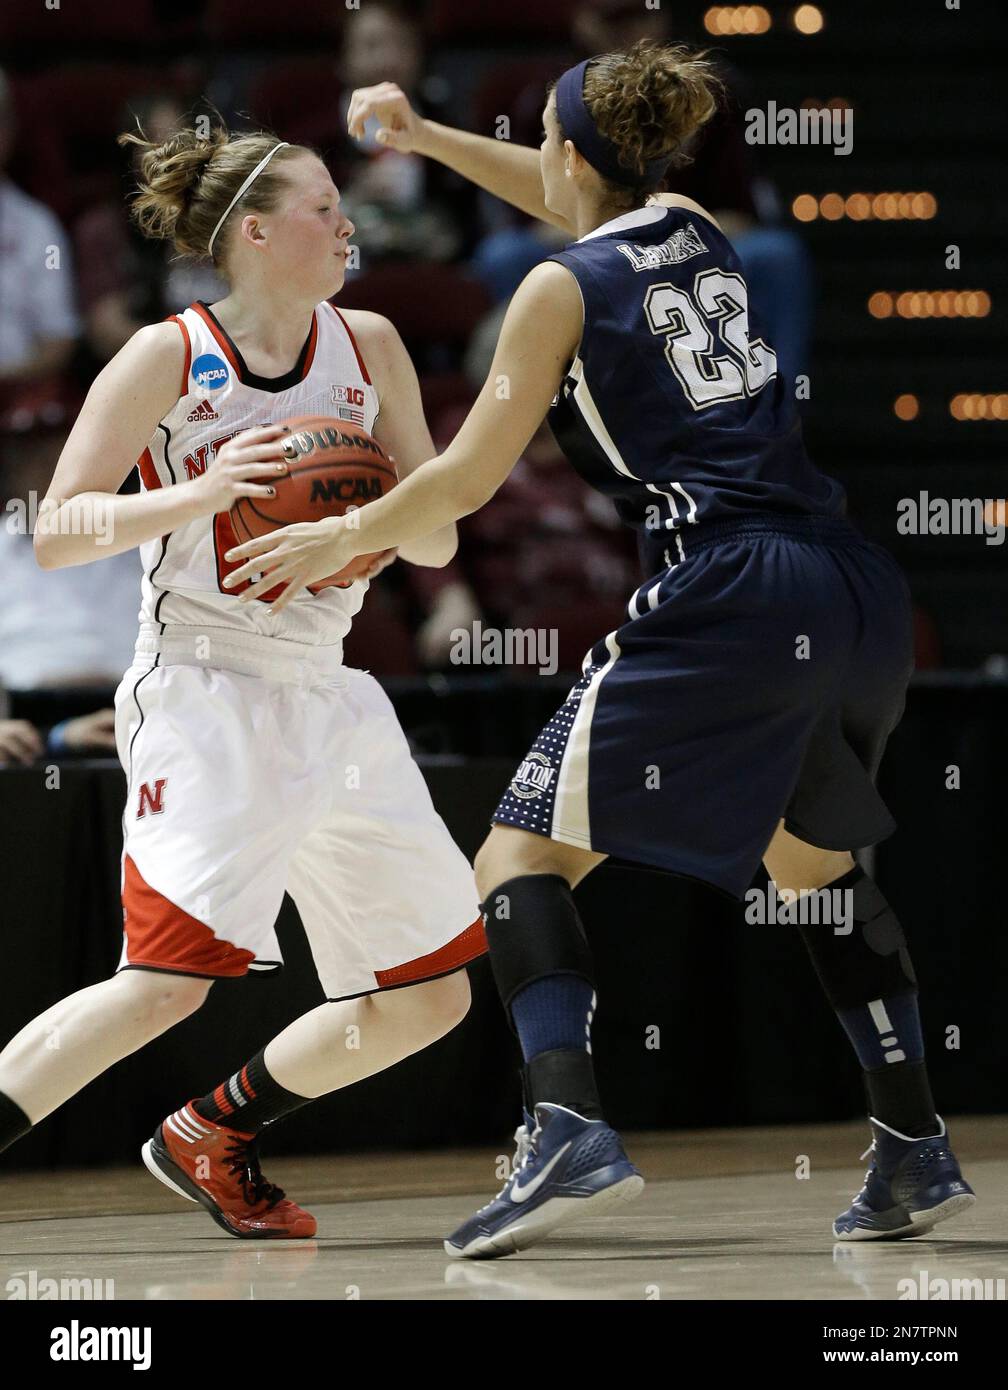 Nebraska's Lindsey Moore, left, tries to get past Chattanooga's Kylie Lambert (22) during the first half of a first-round game in the NCAA womens' college basketball tournament in College Station, Texas, Saturday, March 23, 2013. (AP Photo/Pat Sullivan) Stock Photo